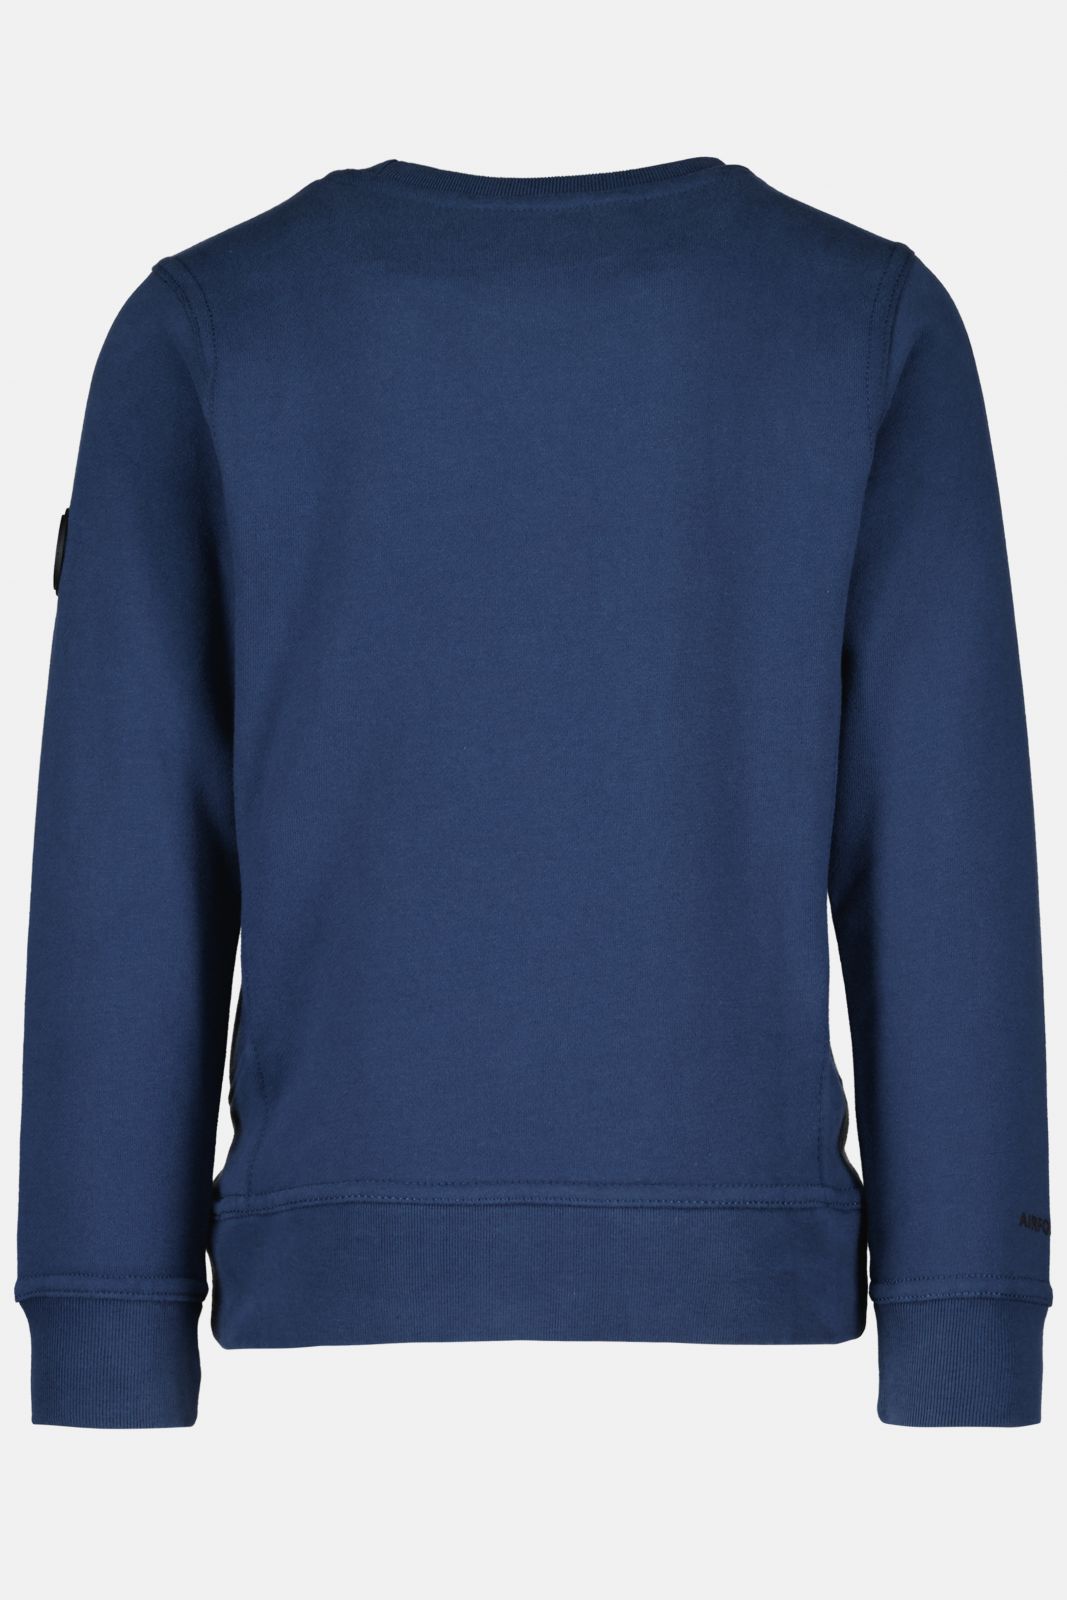 Air Force SWEATER